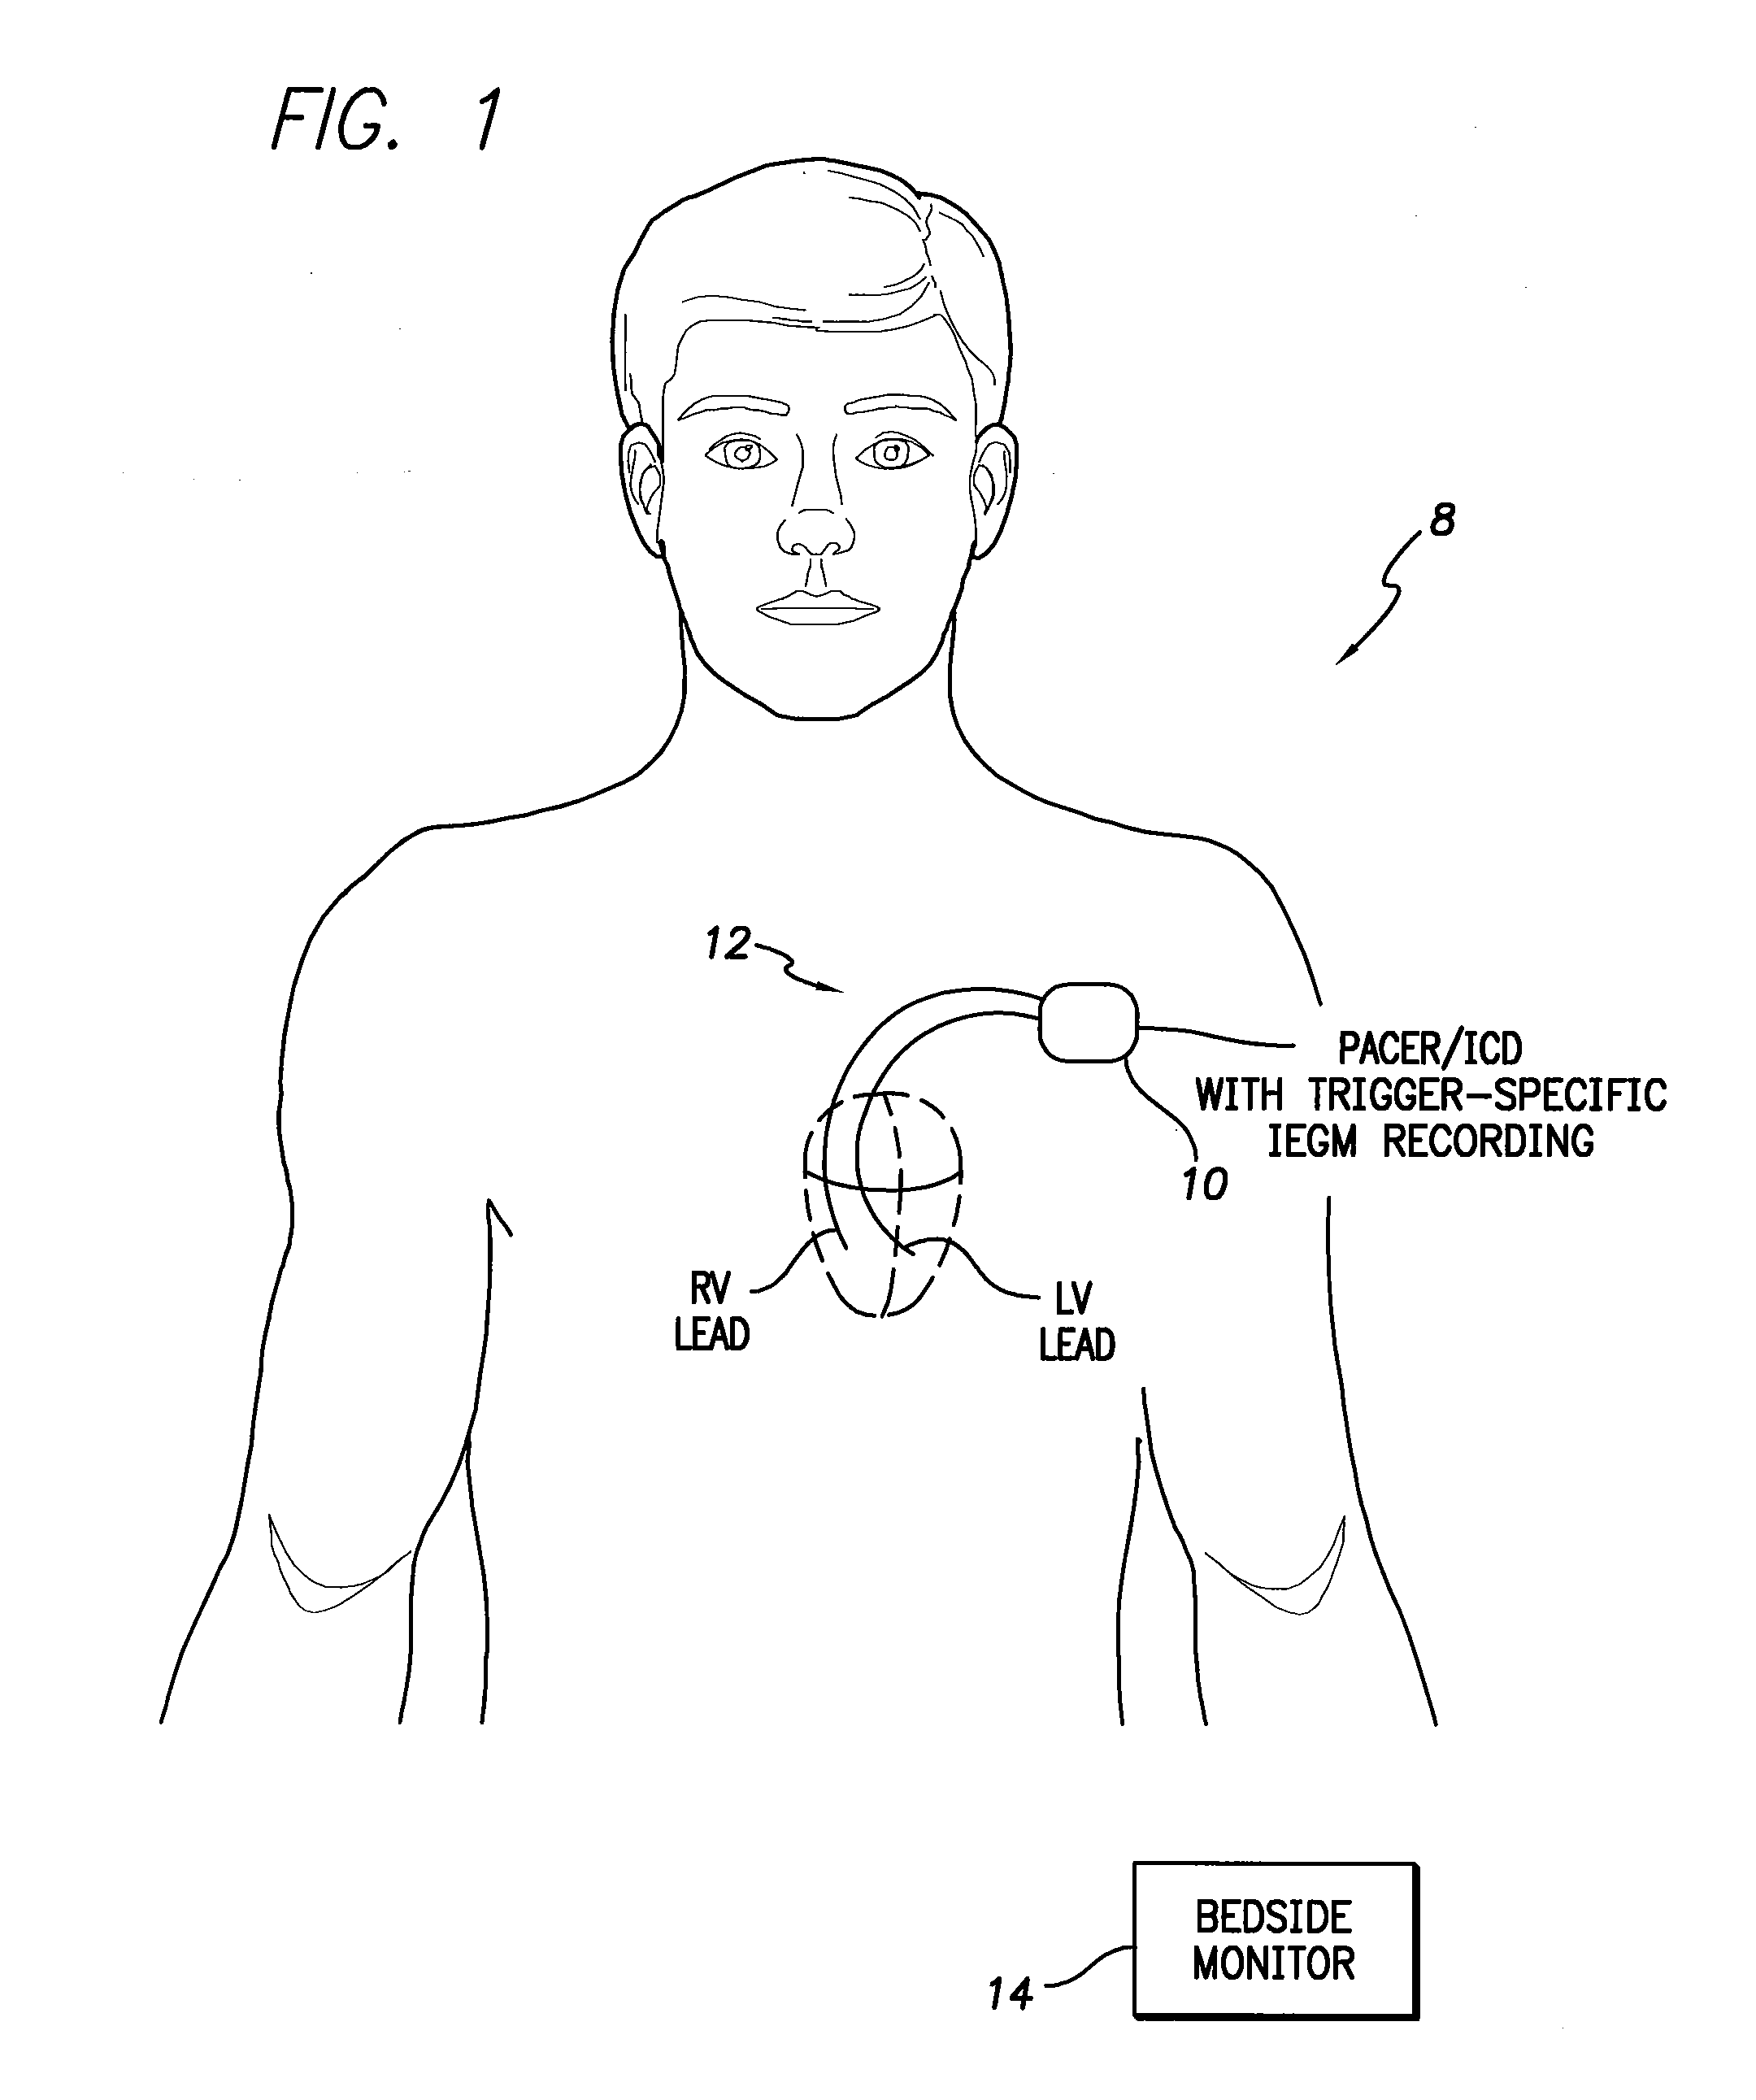 System and method for trigger-specific recording of cardiac signals using an implantable medical device